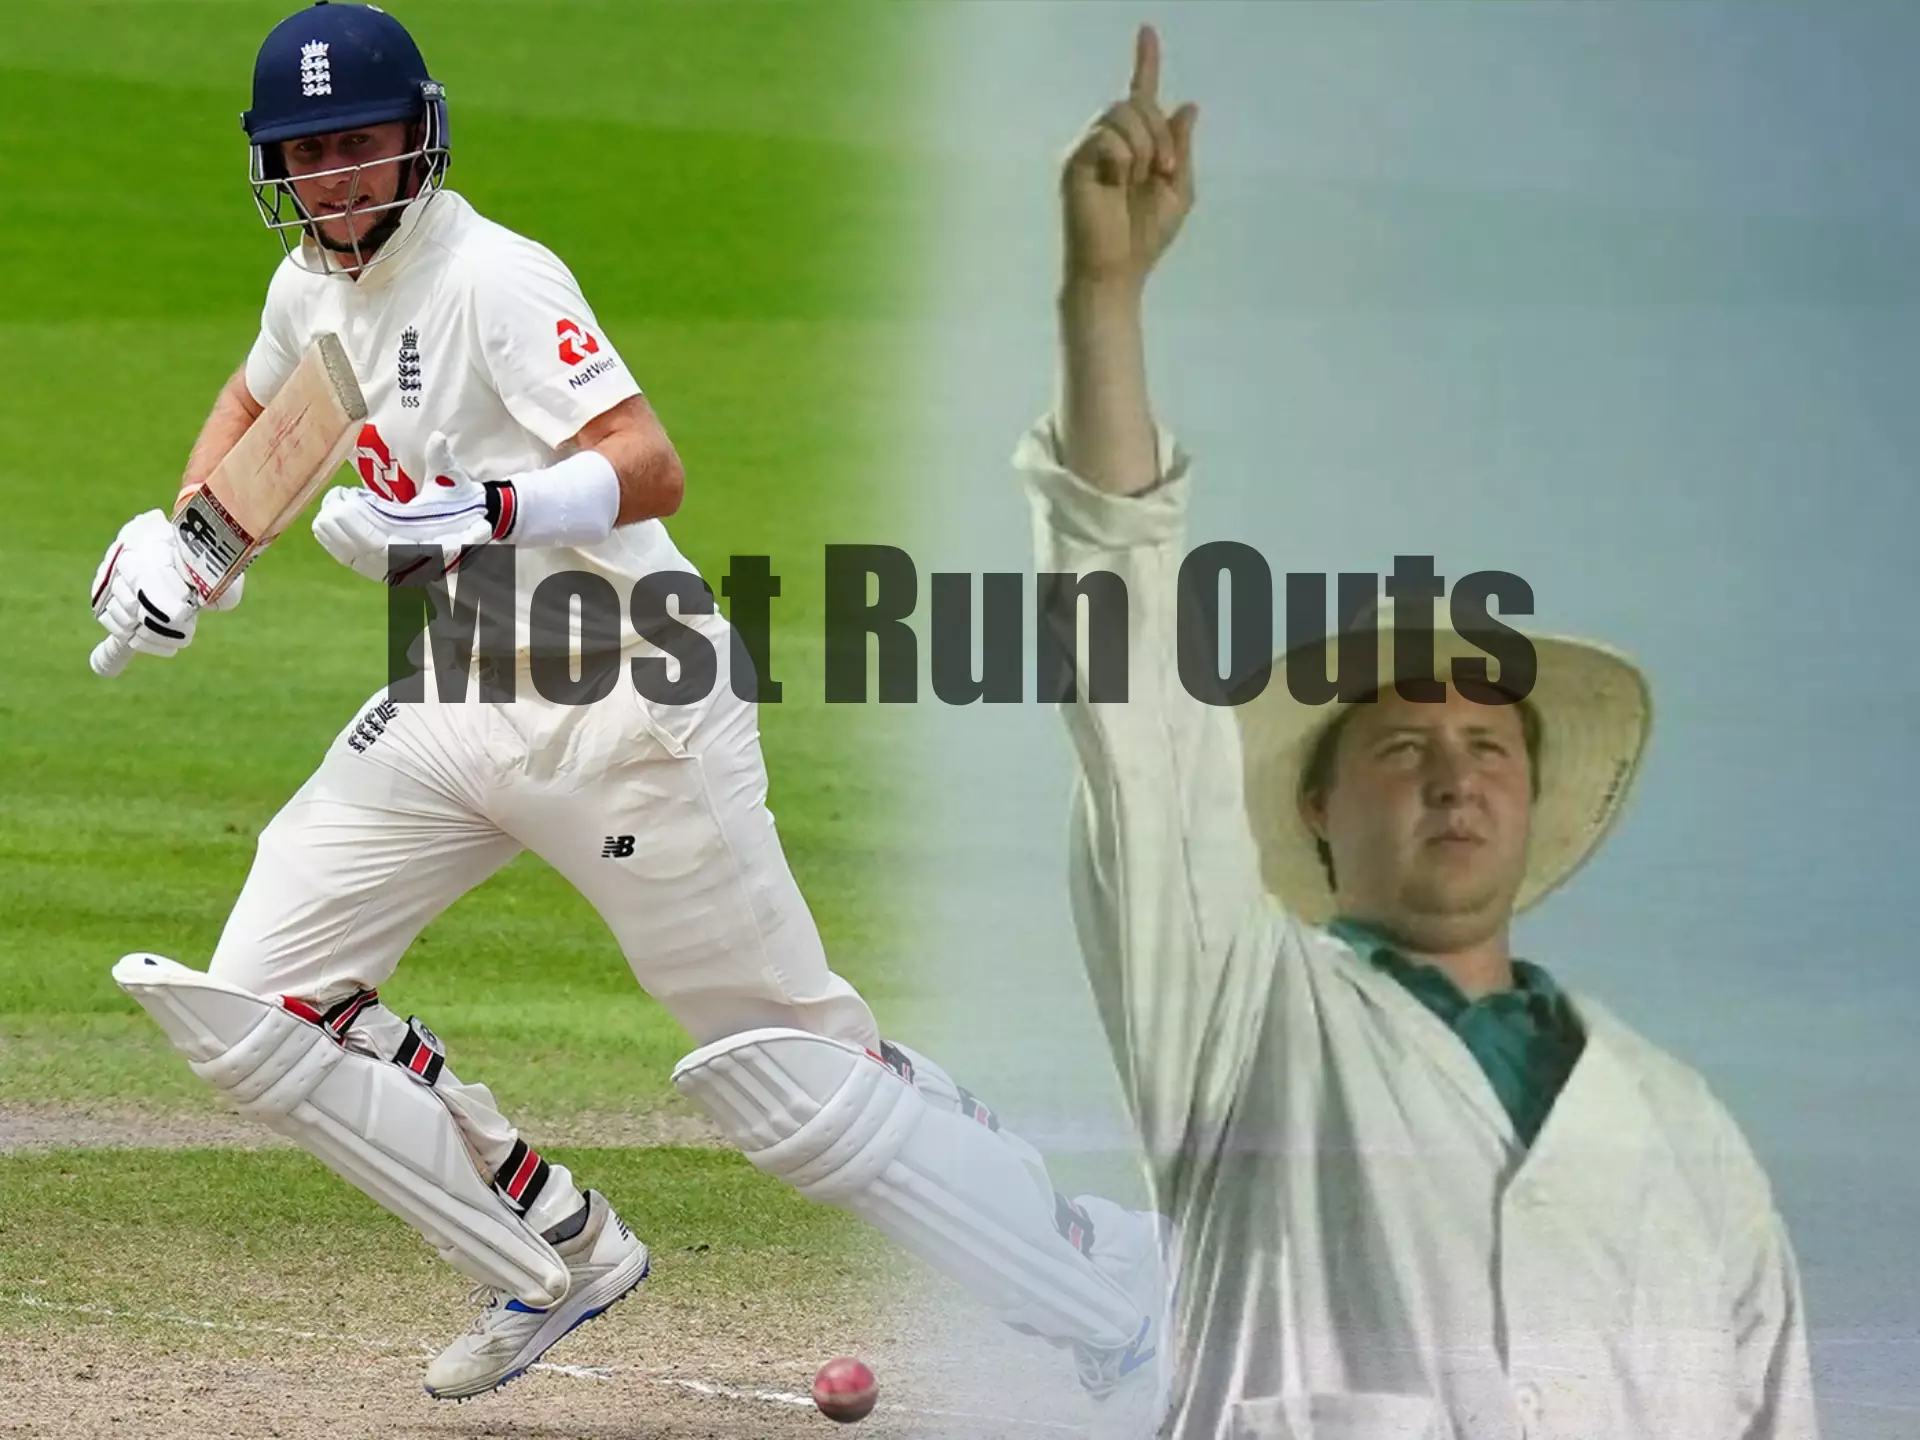 There are a lot of bets for inexperienced players at cricket betting, for example most run outs.